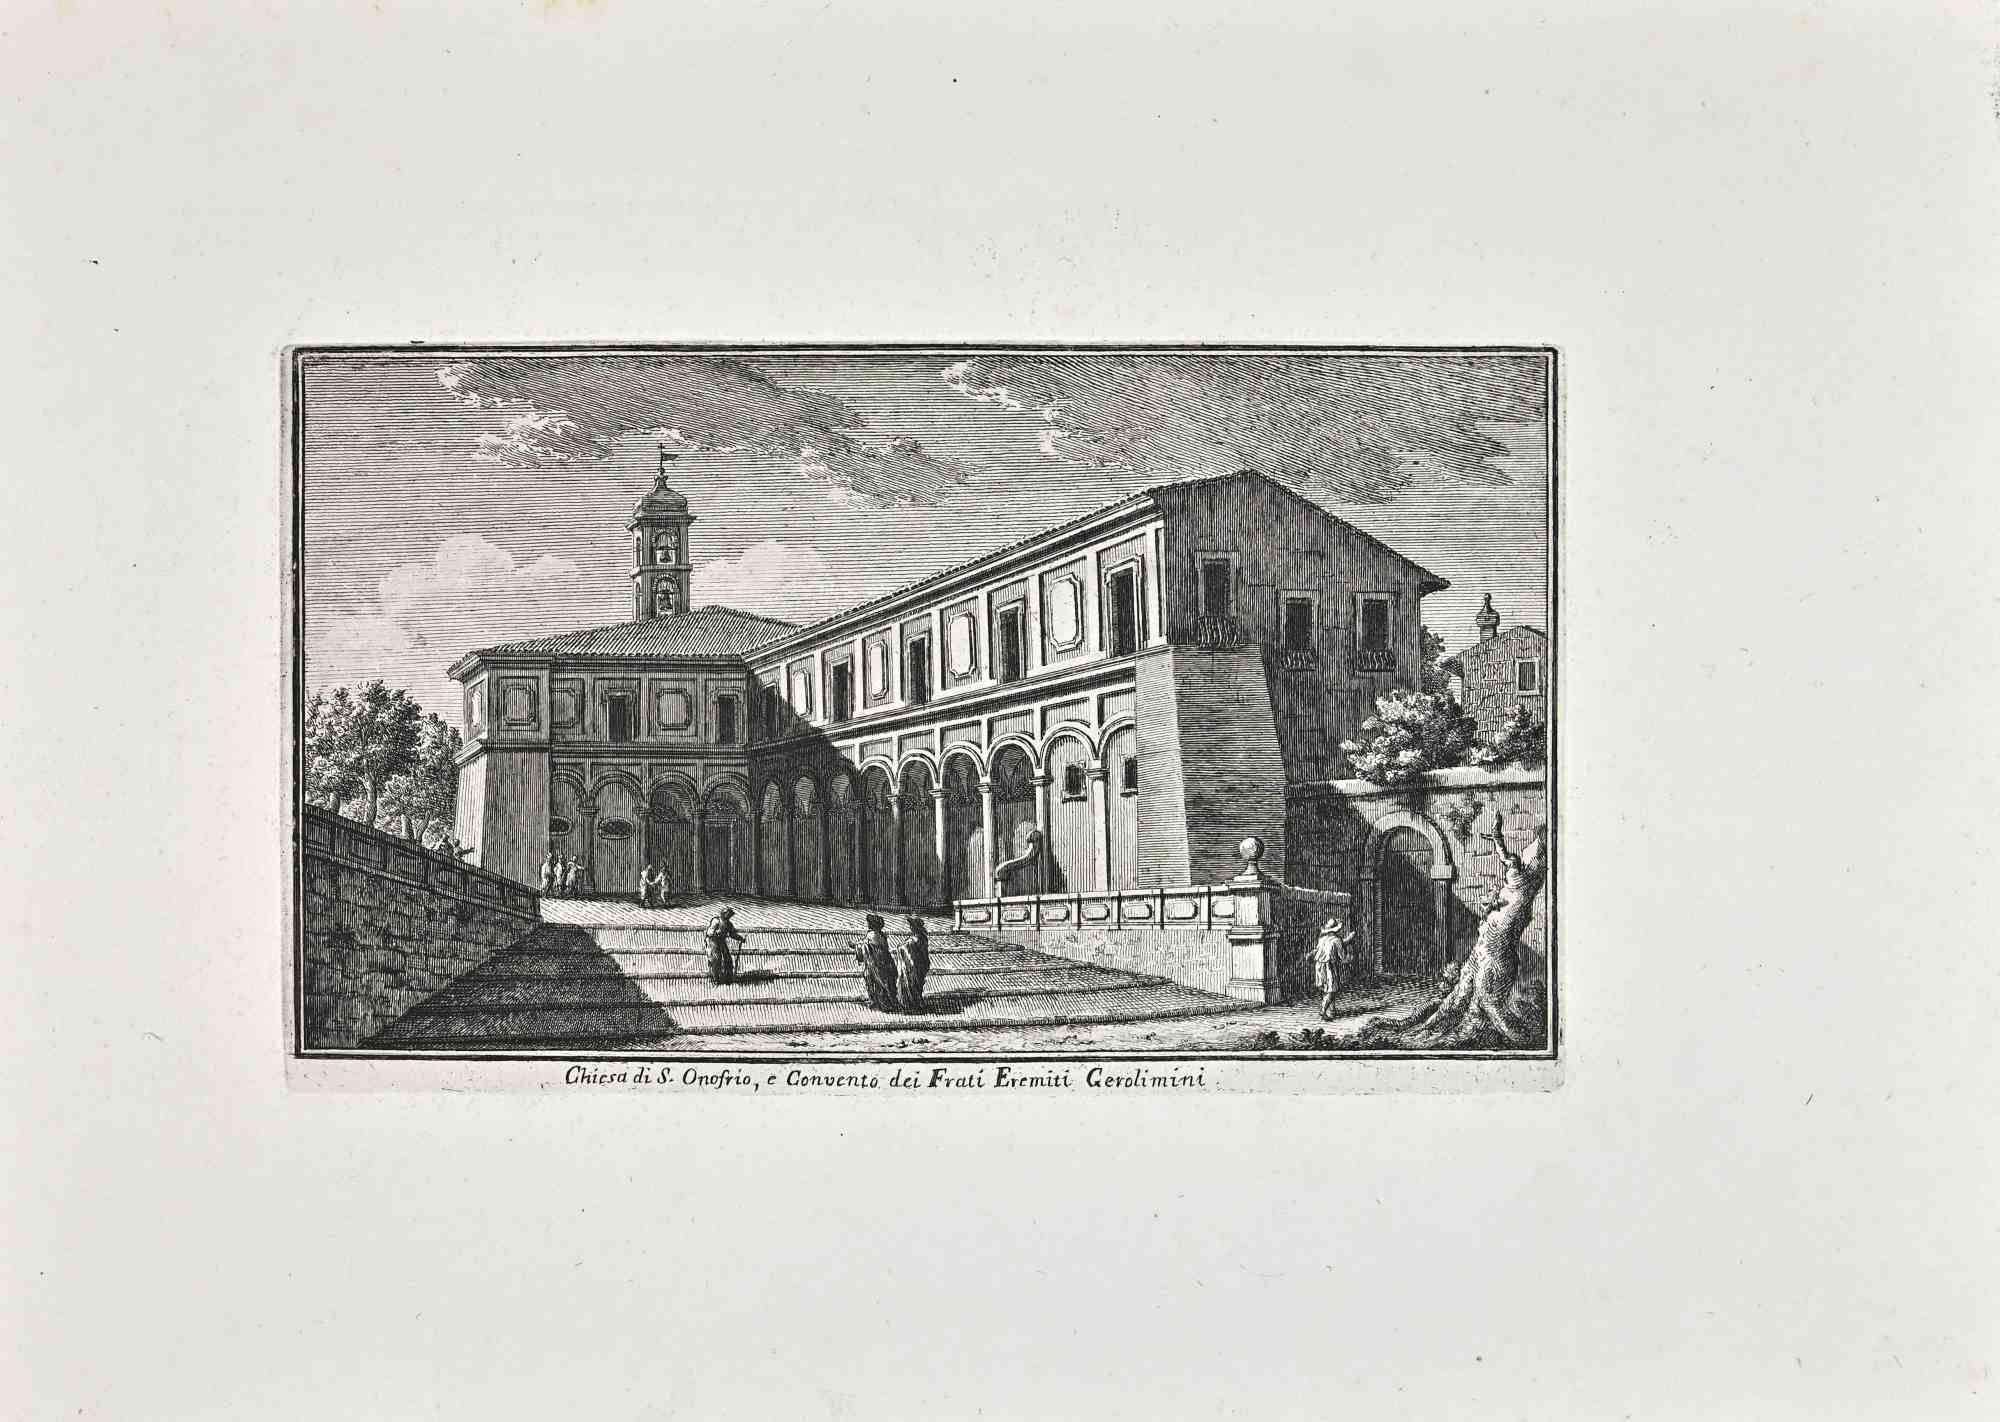 S. Onofrio Church is an original etching of the Late 18th century realized by Giuseppe Vasi.

Signed and titled on plate lower margin. 

Good conditions.

Giuseppe Vasi  (Corleone,1710 - Rome, 1782) was an engraver, architect, and landscape artist.